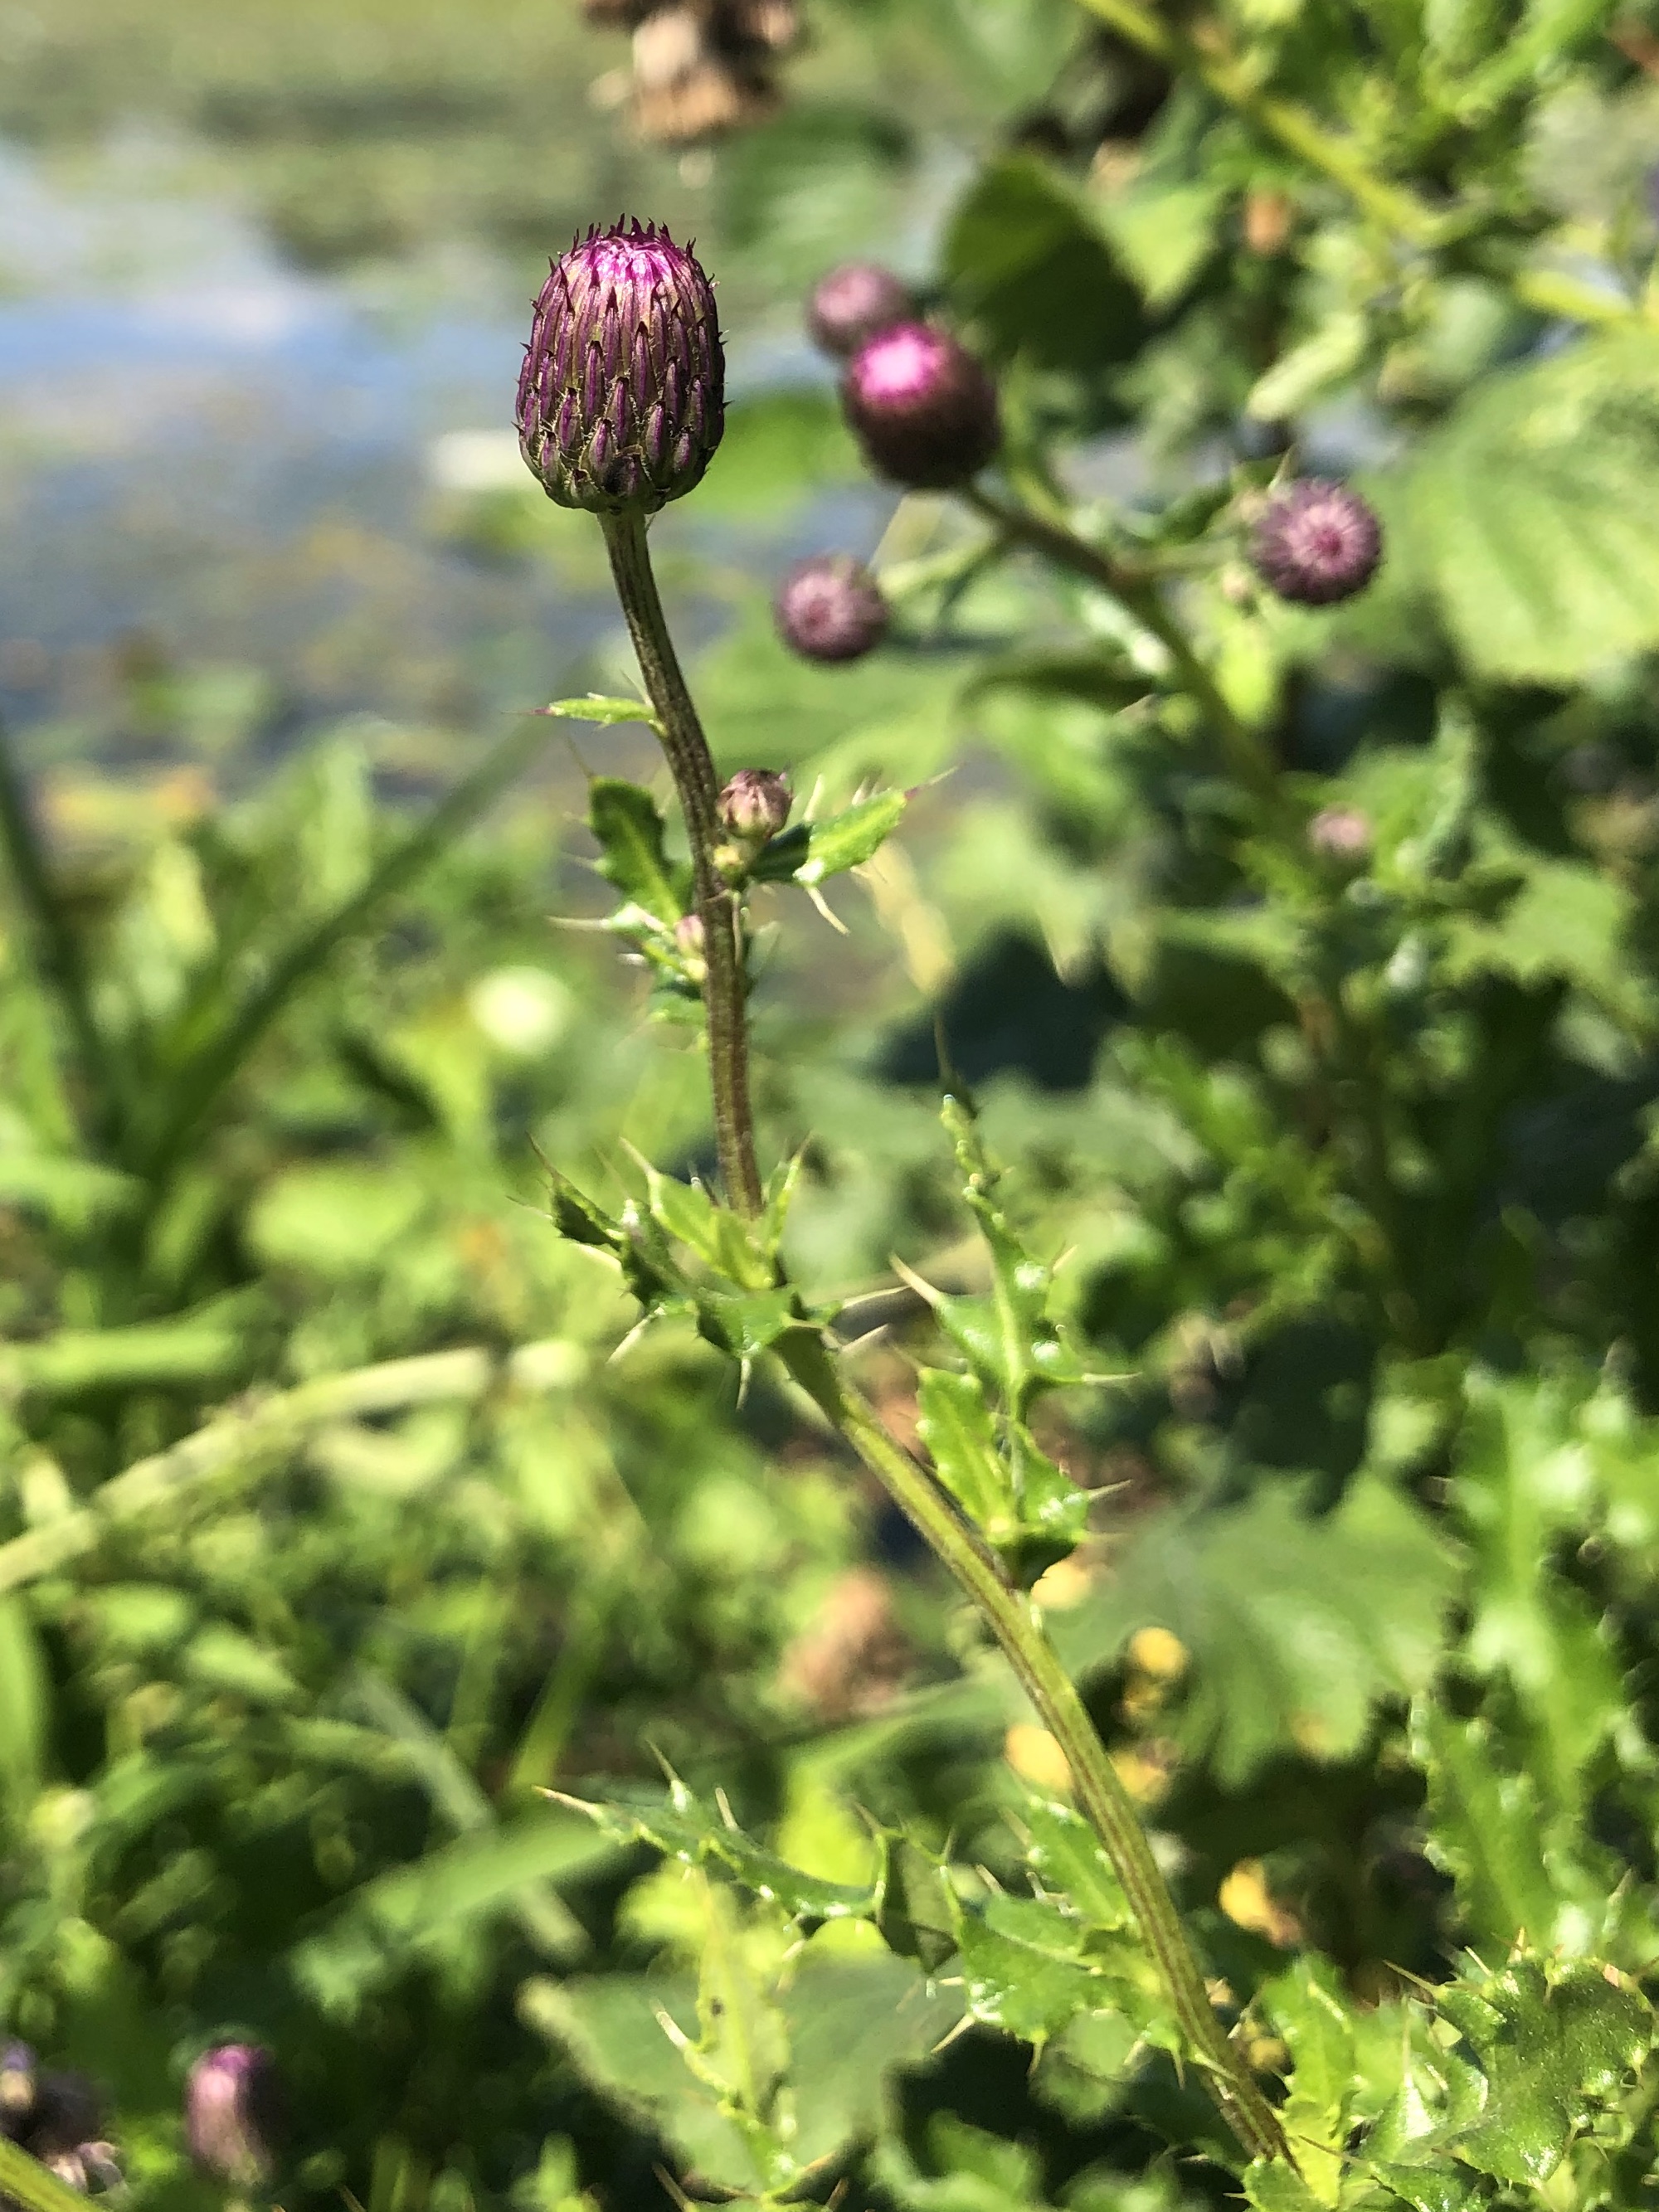 Canada Thistle on the shore of Vilas Park Lagoon in Vilas Park in Madison, Wisconsin on August 22, 2022.